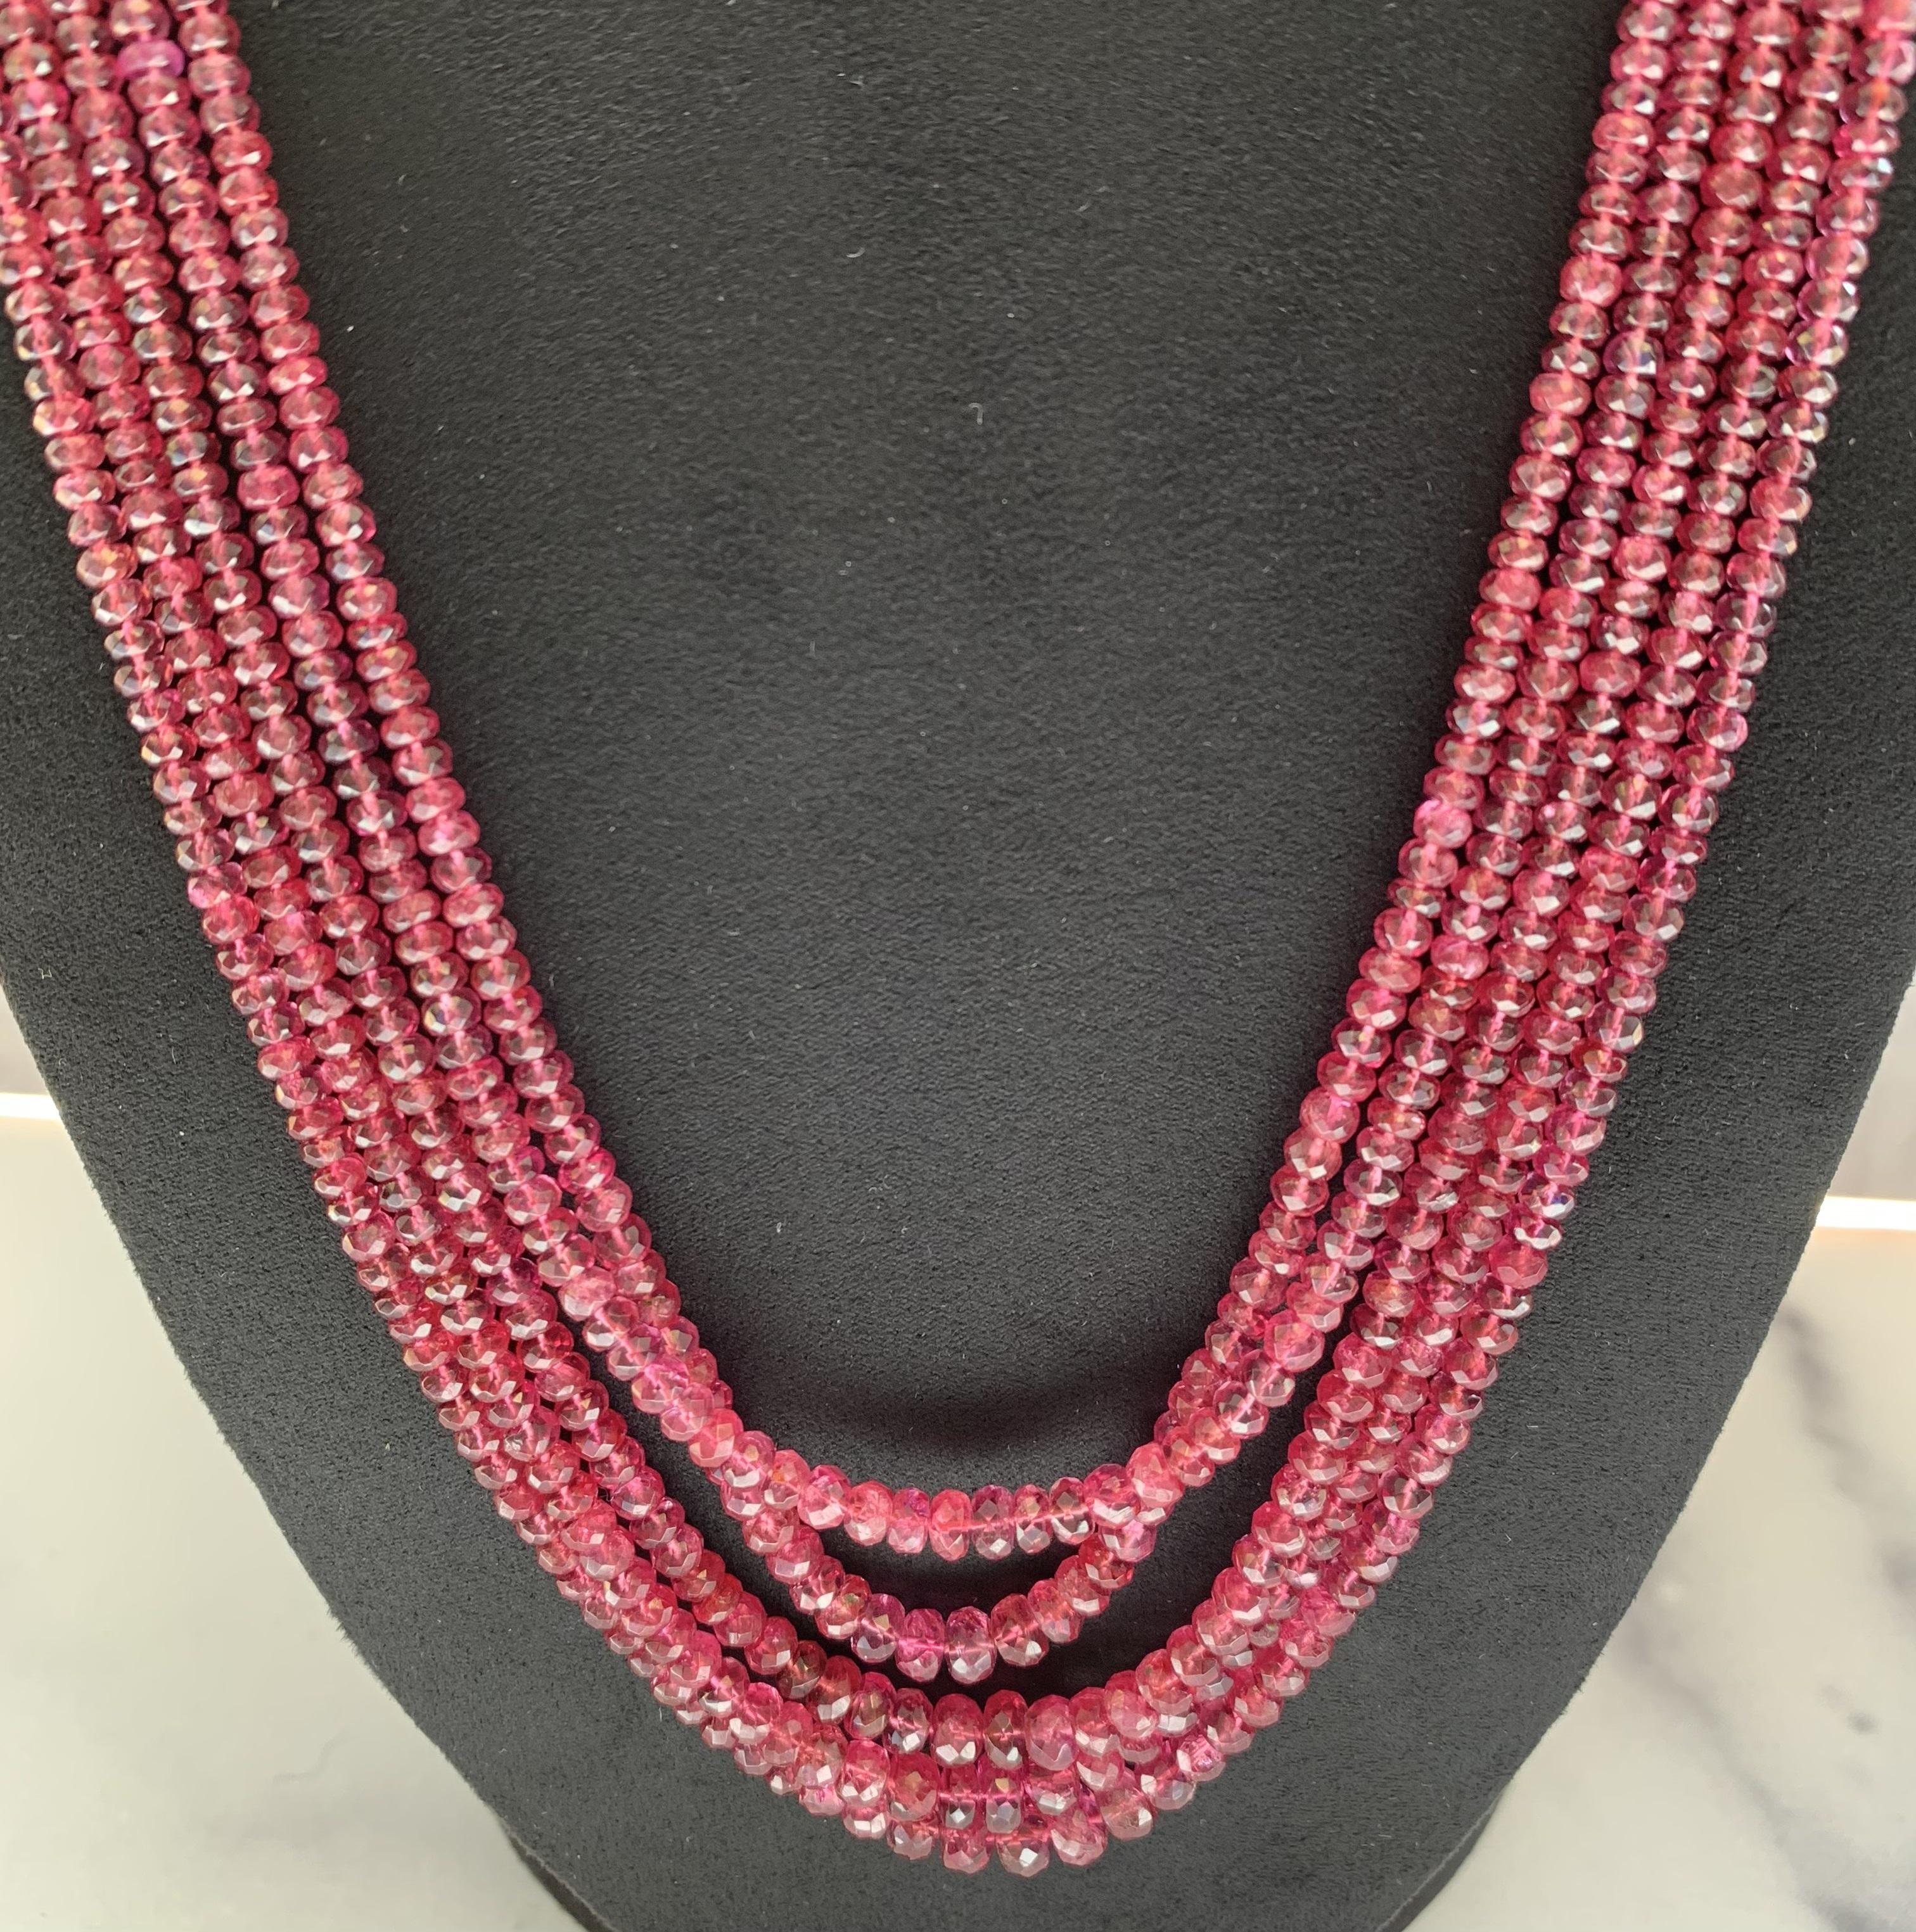 Life in color Collection

Spinel beaded totaling 326.40ct featuring as a multi-strand long necklace. The length can be adjustable from the basic 24 inches.

Spinel: 326.40ct total weight.